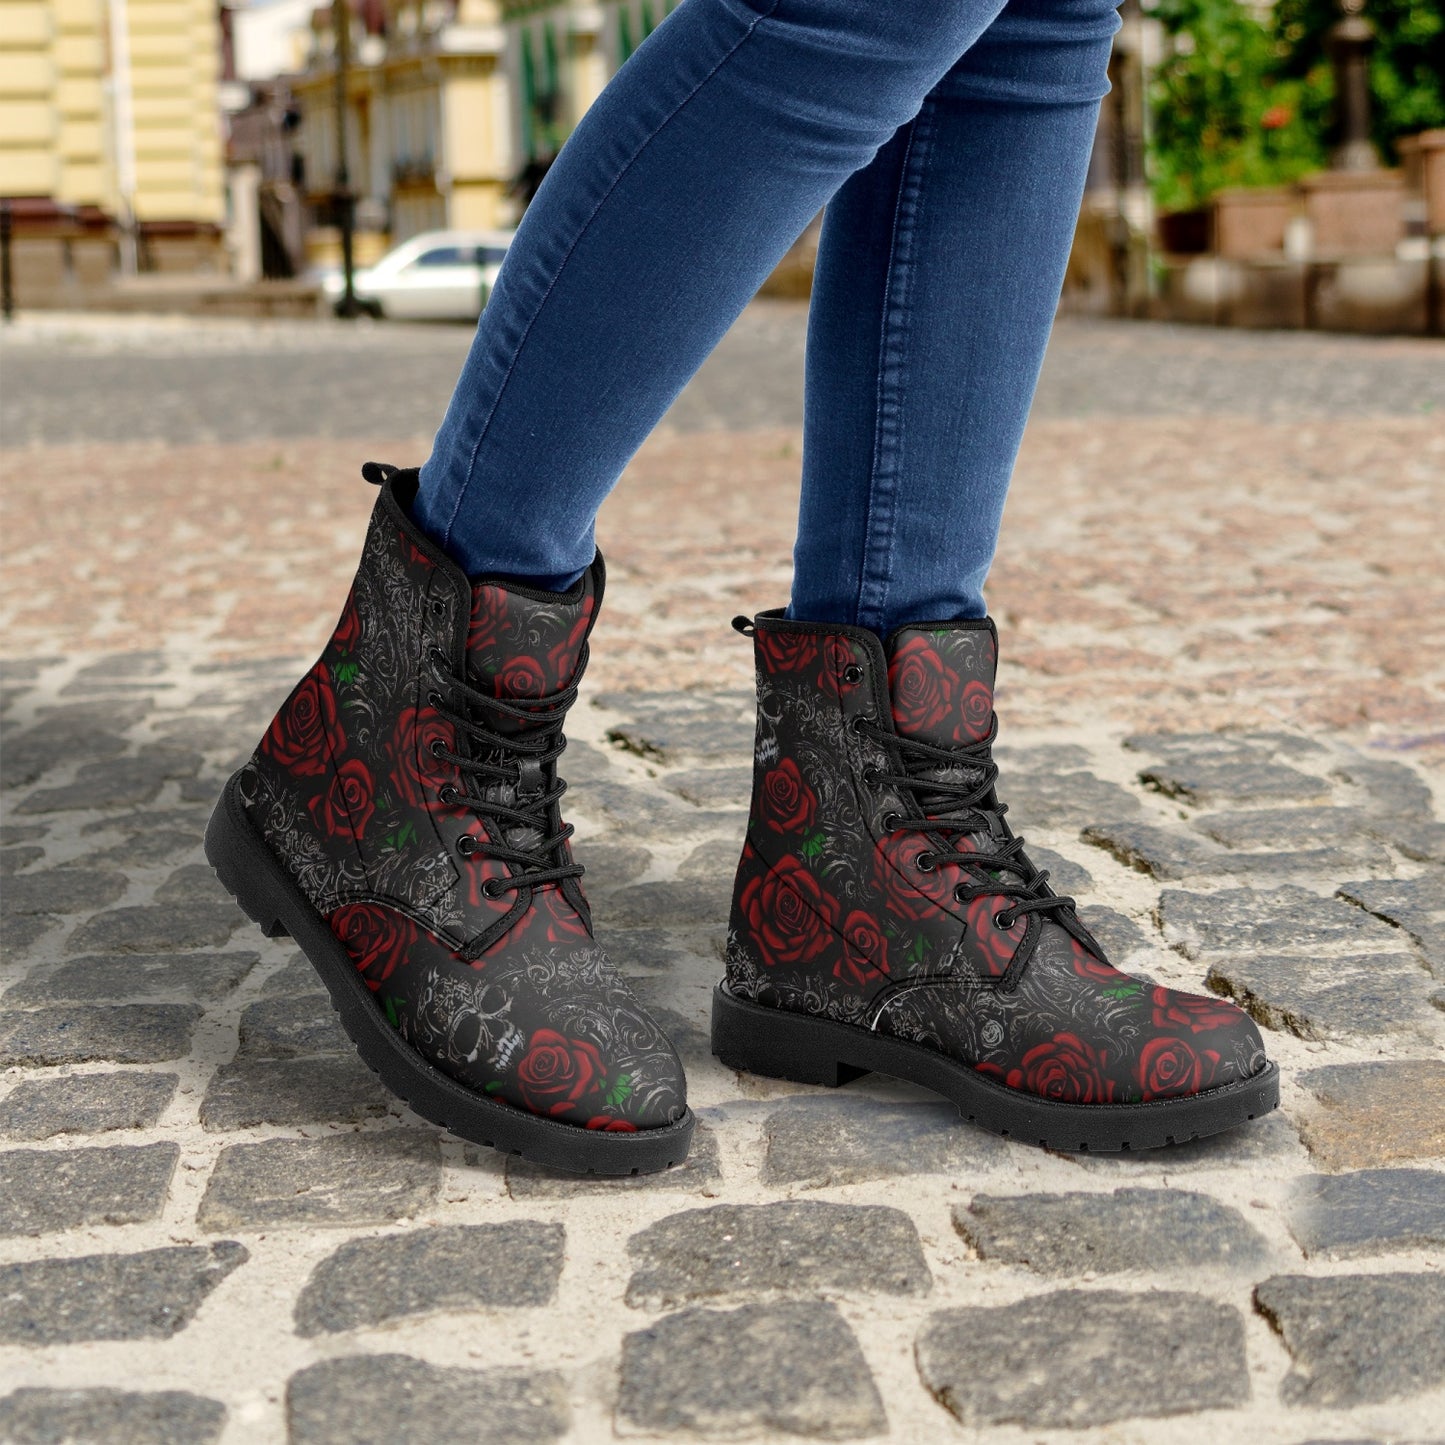 Women's Red Roses and Skulls Floral Pattern Combat Boots